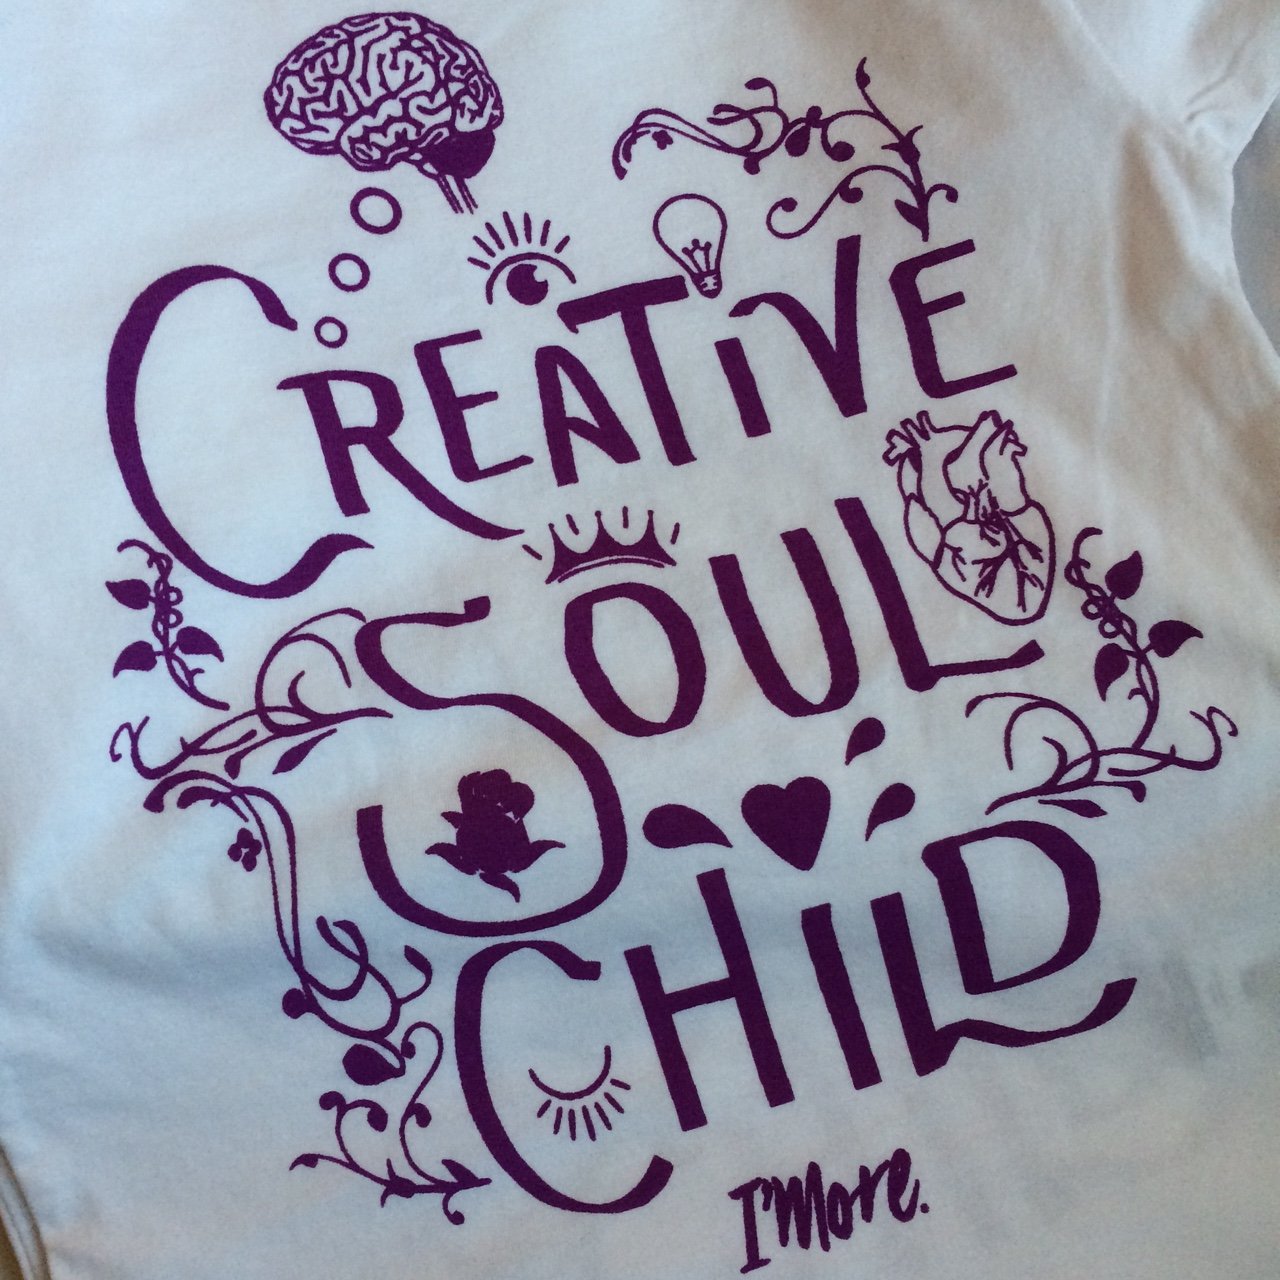 Image of 'CREATIVE SOUL CHILD' T